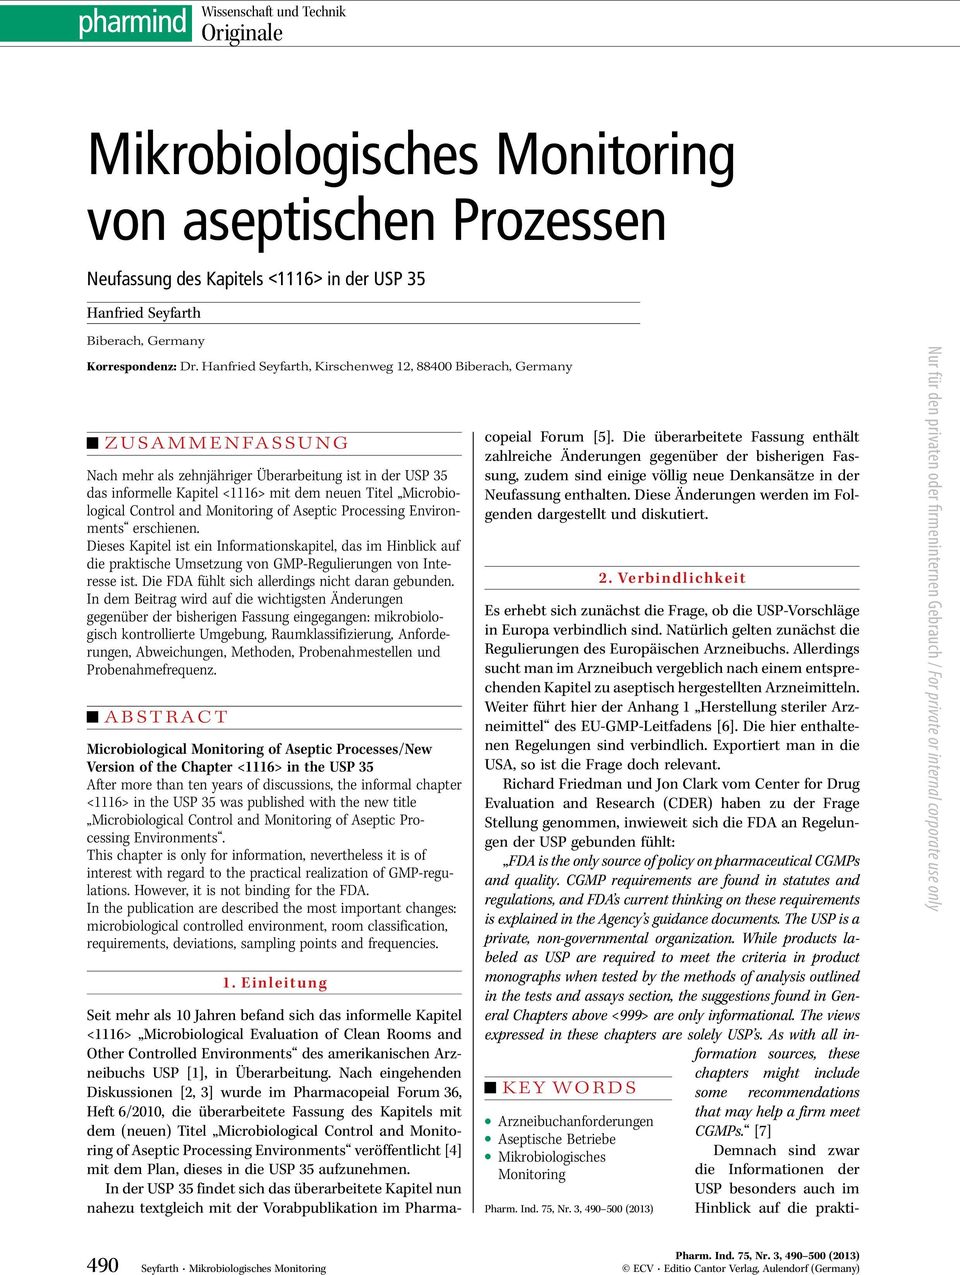 Microbiological Control and Monitoring of Aseptic Processing Environments erschienen.